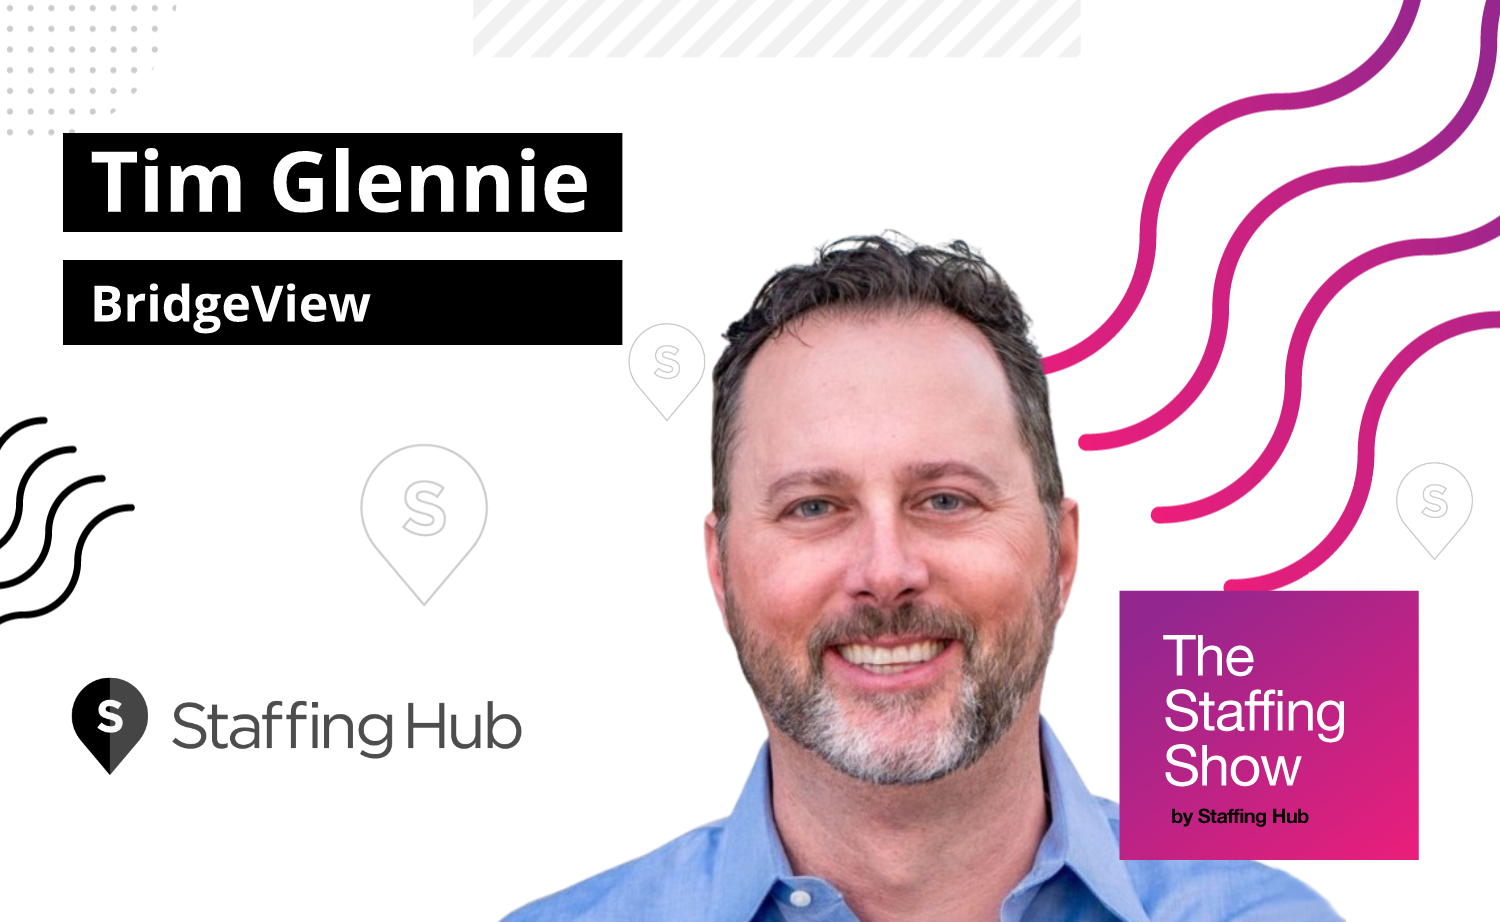 Tim Glennie, Managing Partner and Co-Founder of BridgeView, on Embracing Change and Failing Forward